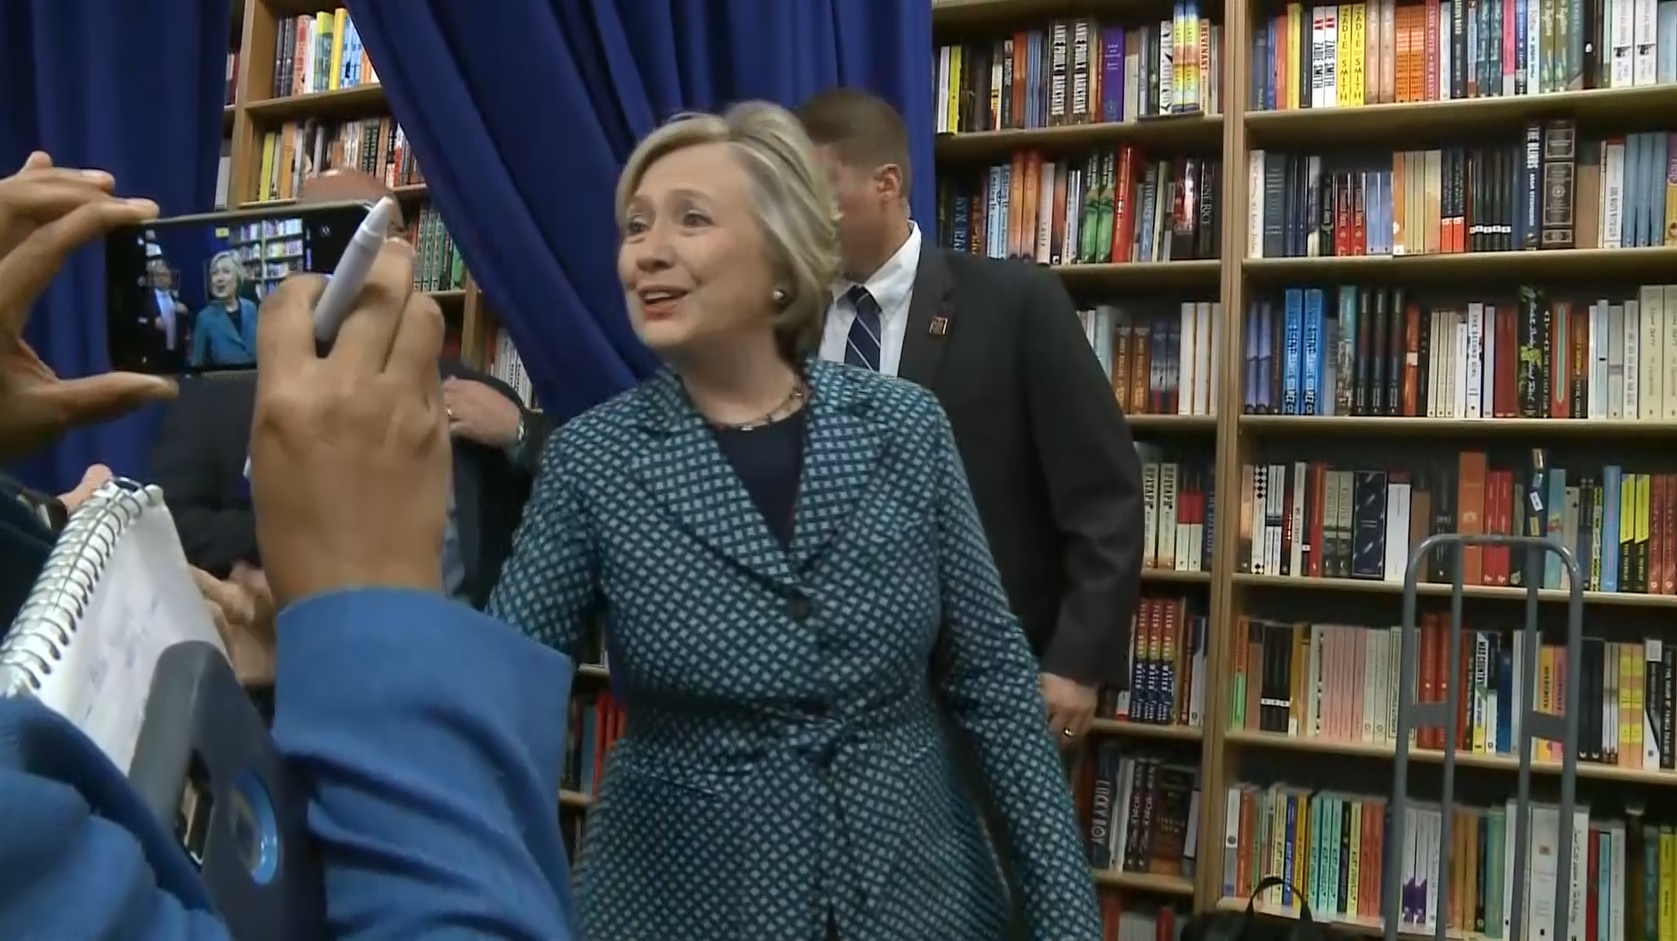 Hillary Clinton greets supporters at Books Inc. in San Francisco on October 6, 2017. (CBS)